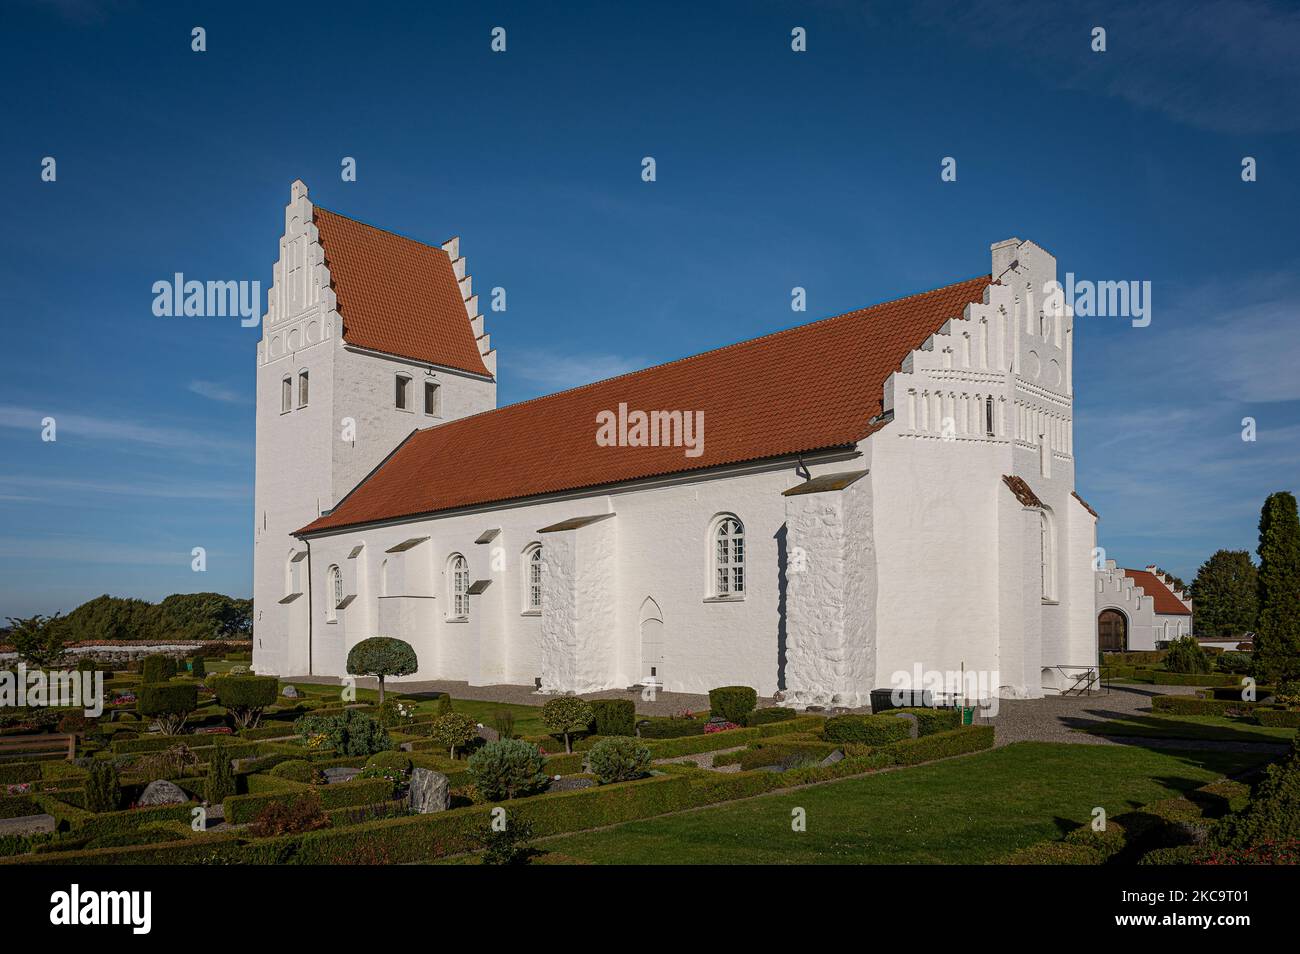 Fanefjord church decorated with lime-based wall paintings by the Elmelunde master from around 1500, Fanefjord church, Denmark, October 10, 2022 Stock Photo